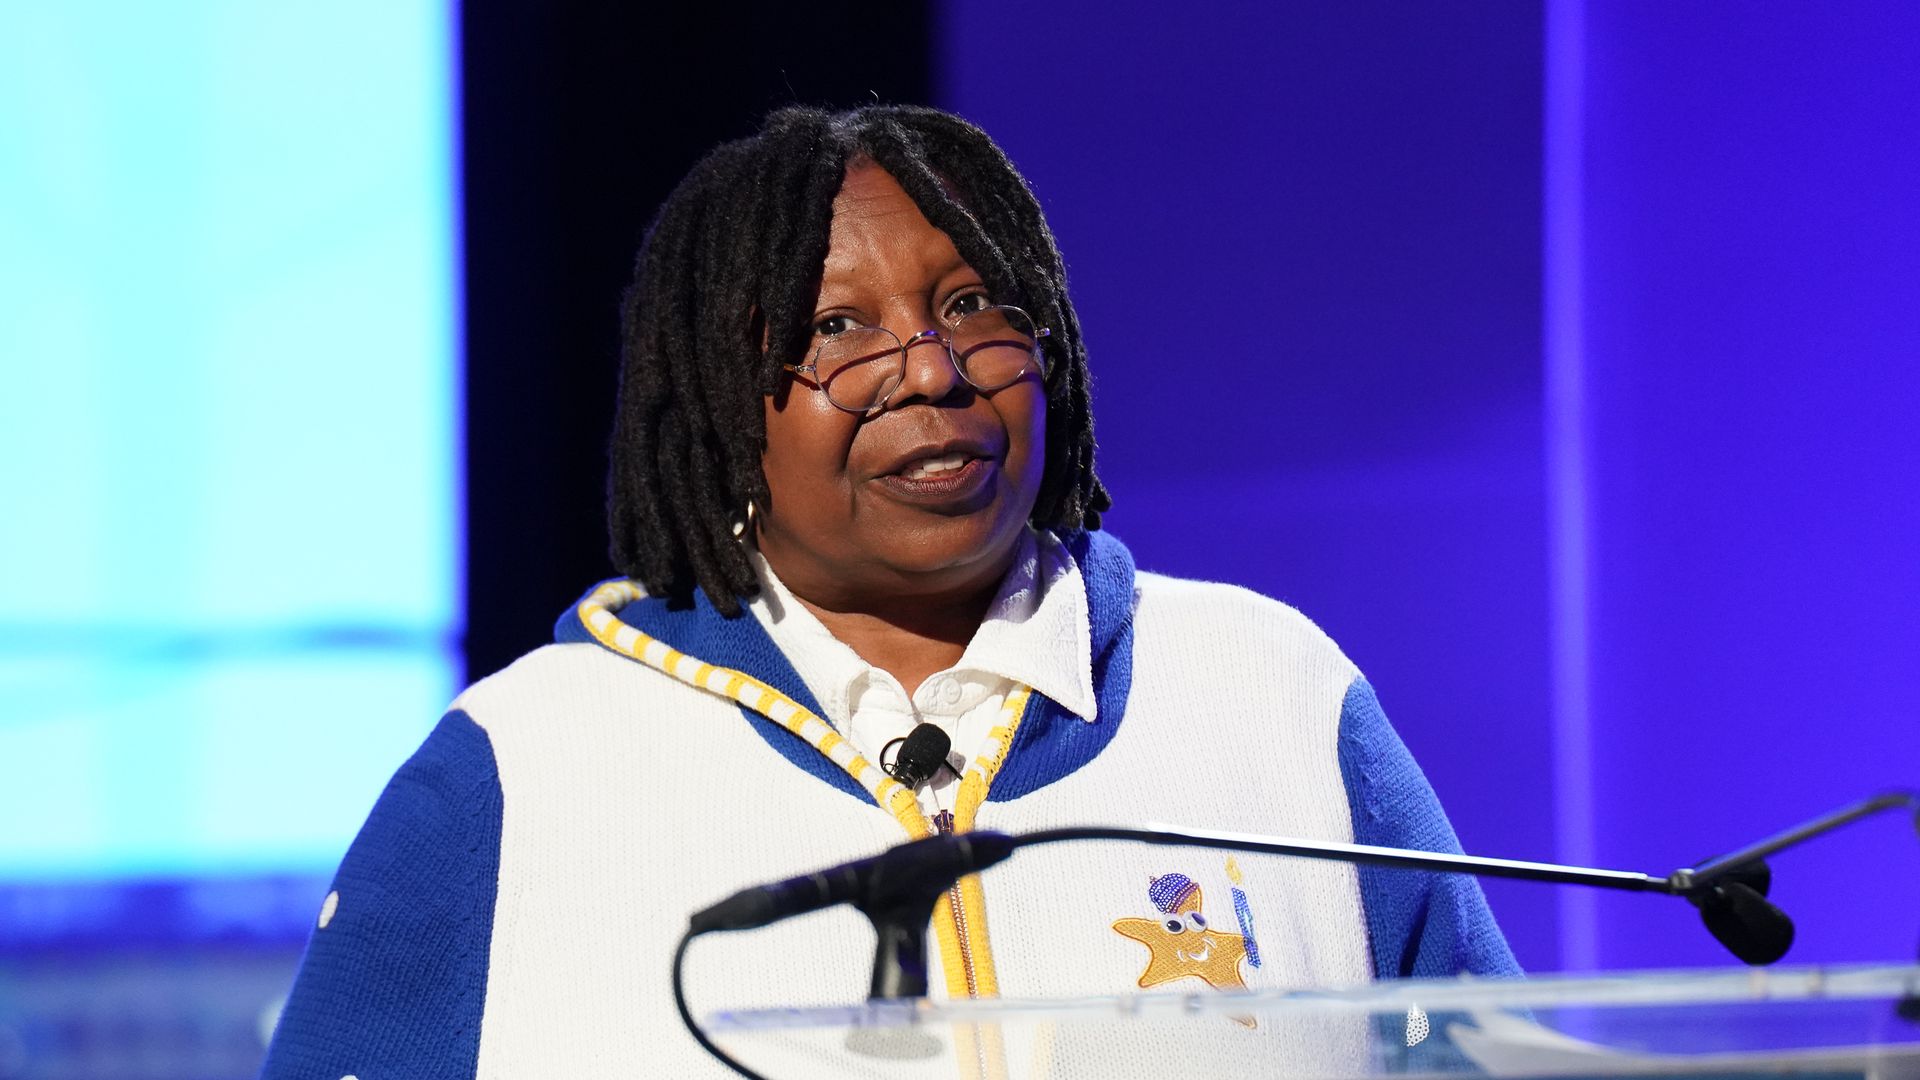 Actress Whoopi Goldberg attends Prostate Cancer Research Foundation's dinner on November 29, 2021 in New York City